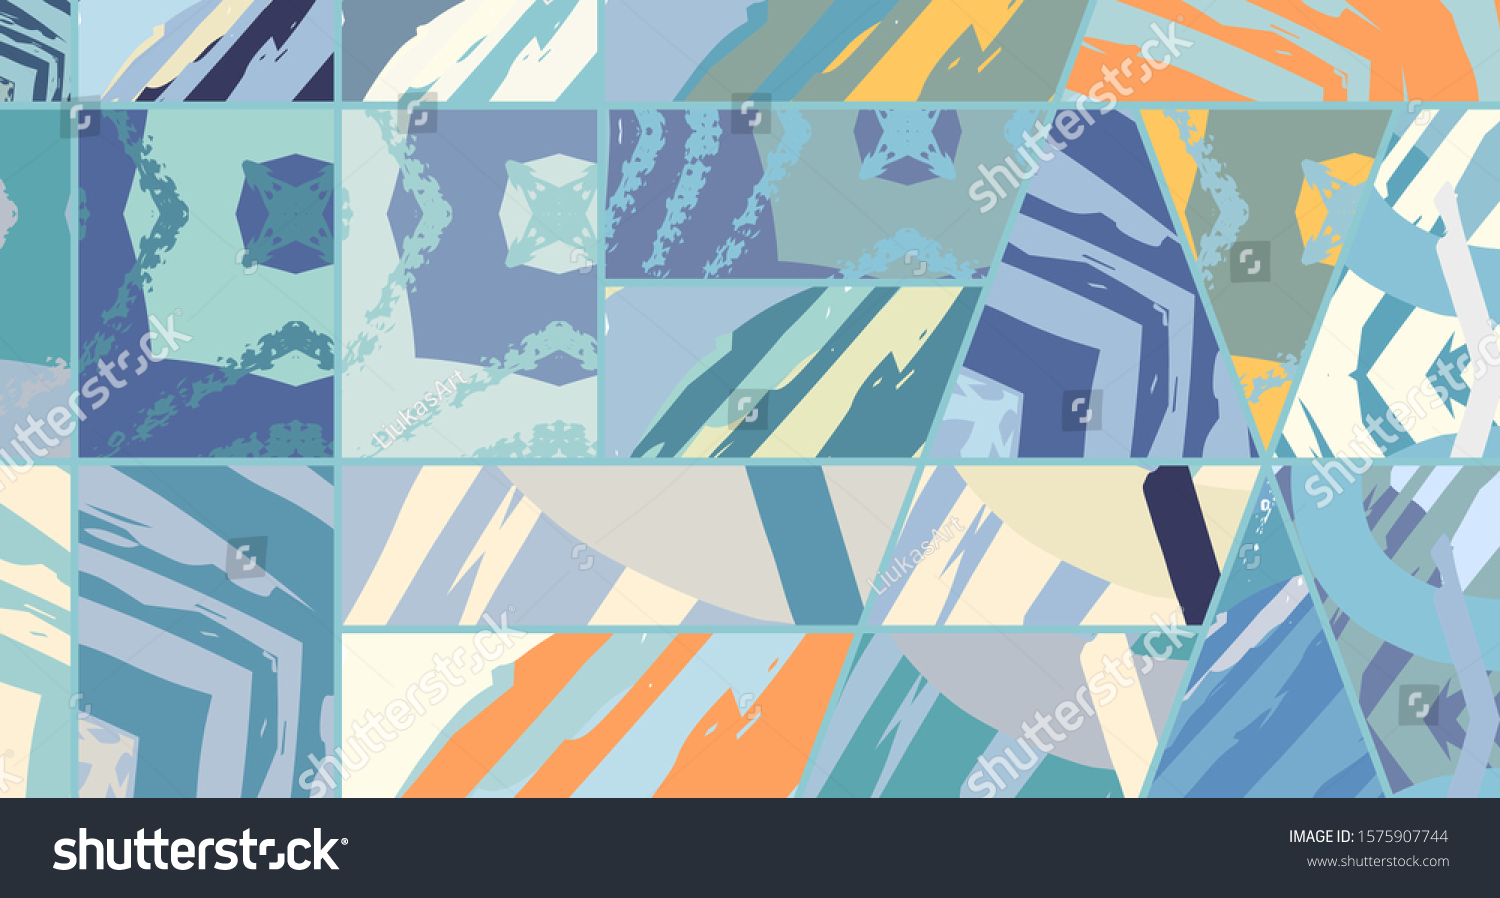 Abstract collage asymmetric pattern. Digital freehand art, grunge texture. Vector patchwork quilt background. Decorative elements, brush strokes ornament for flyer, poster, cover, textile fabric print #1575907744